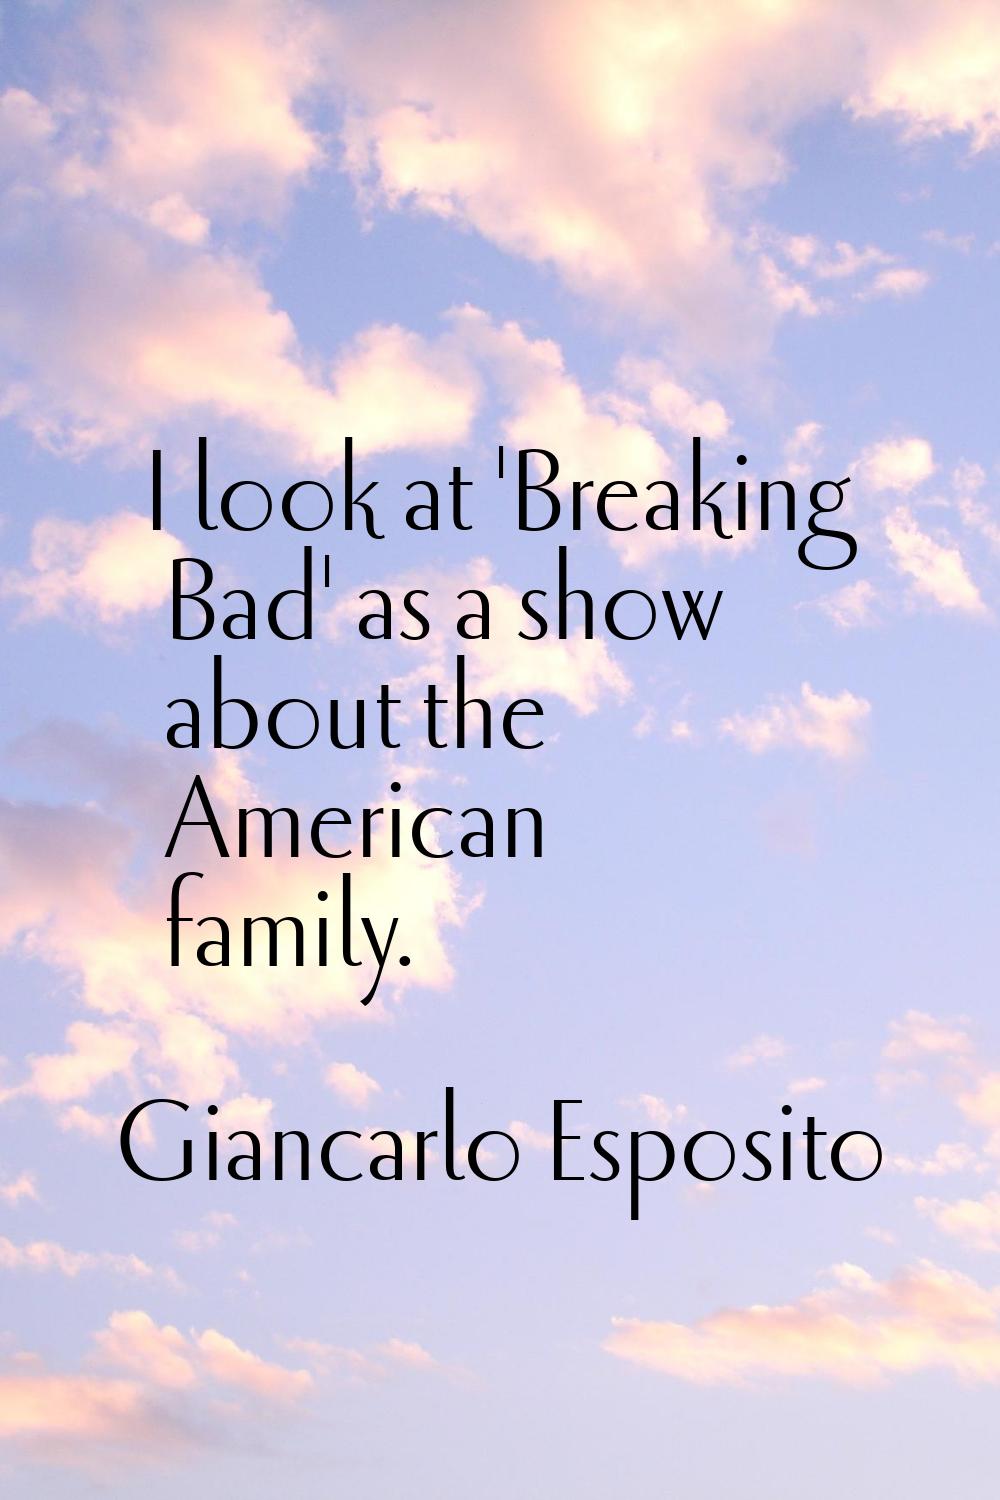 I look at 'Breaking Bad' as a show about the American family.